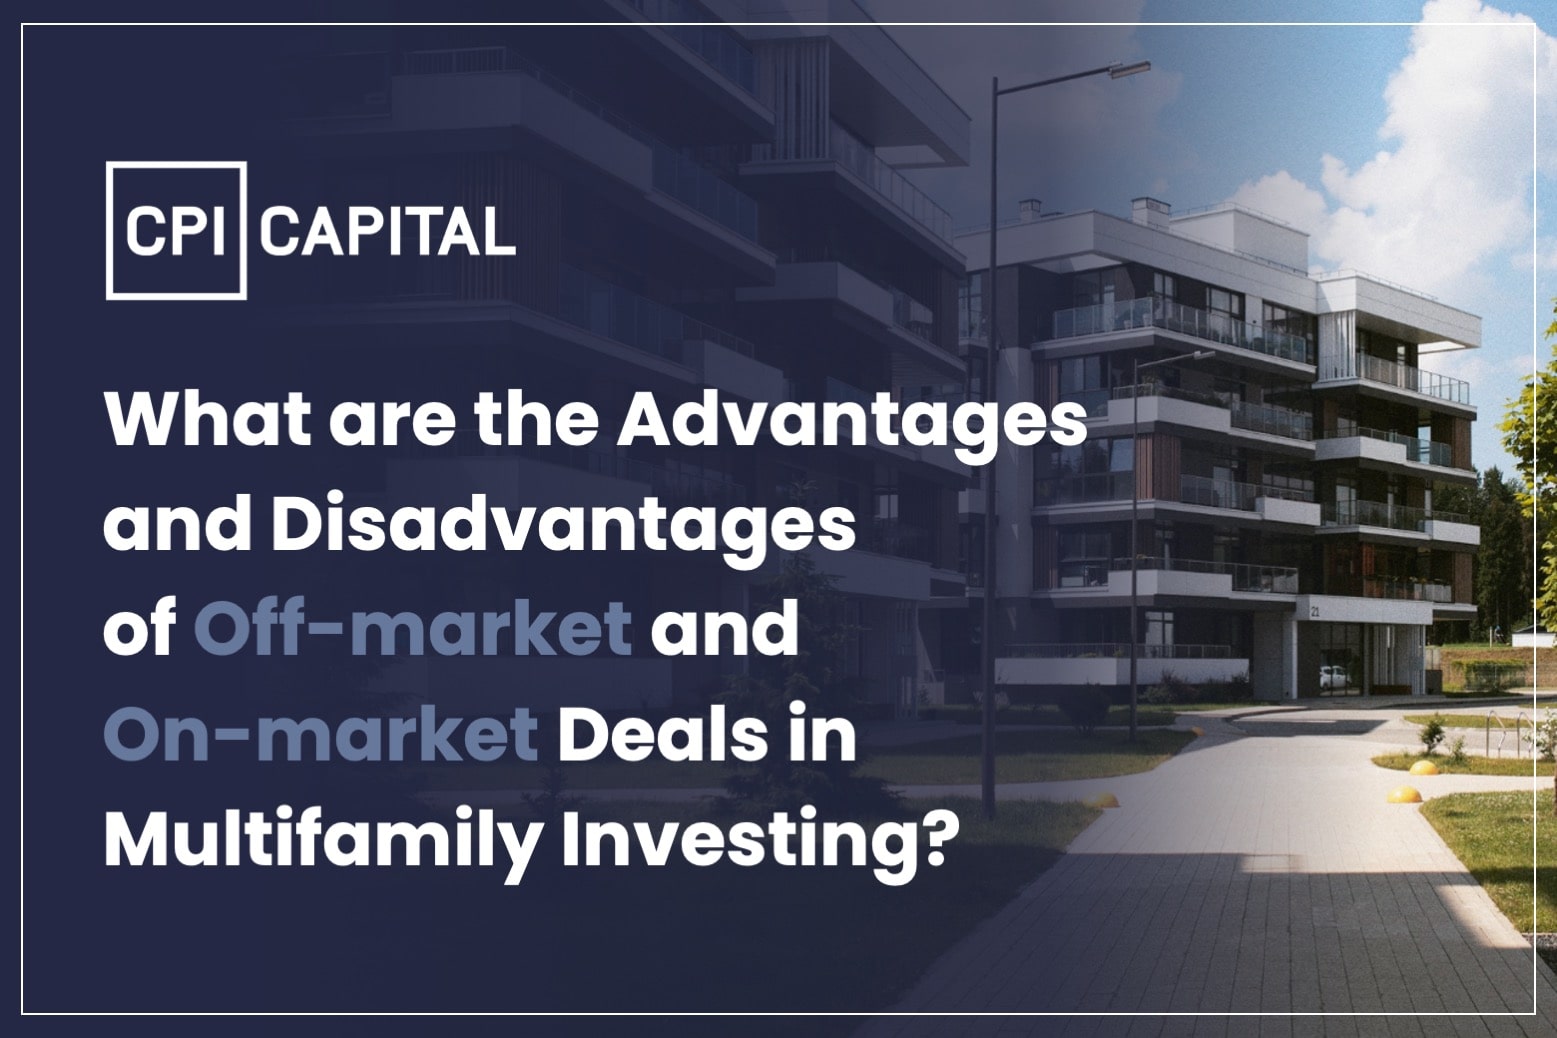 CPI-capital_What-are-the-Advantages-and-Disadvantages-of-Off-market-and-On-market-Deals-in-Multifamily-Investing